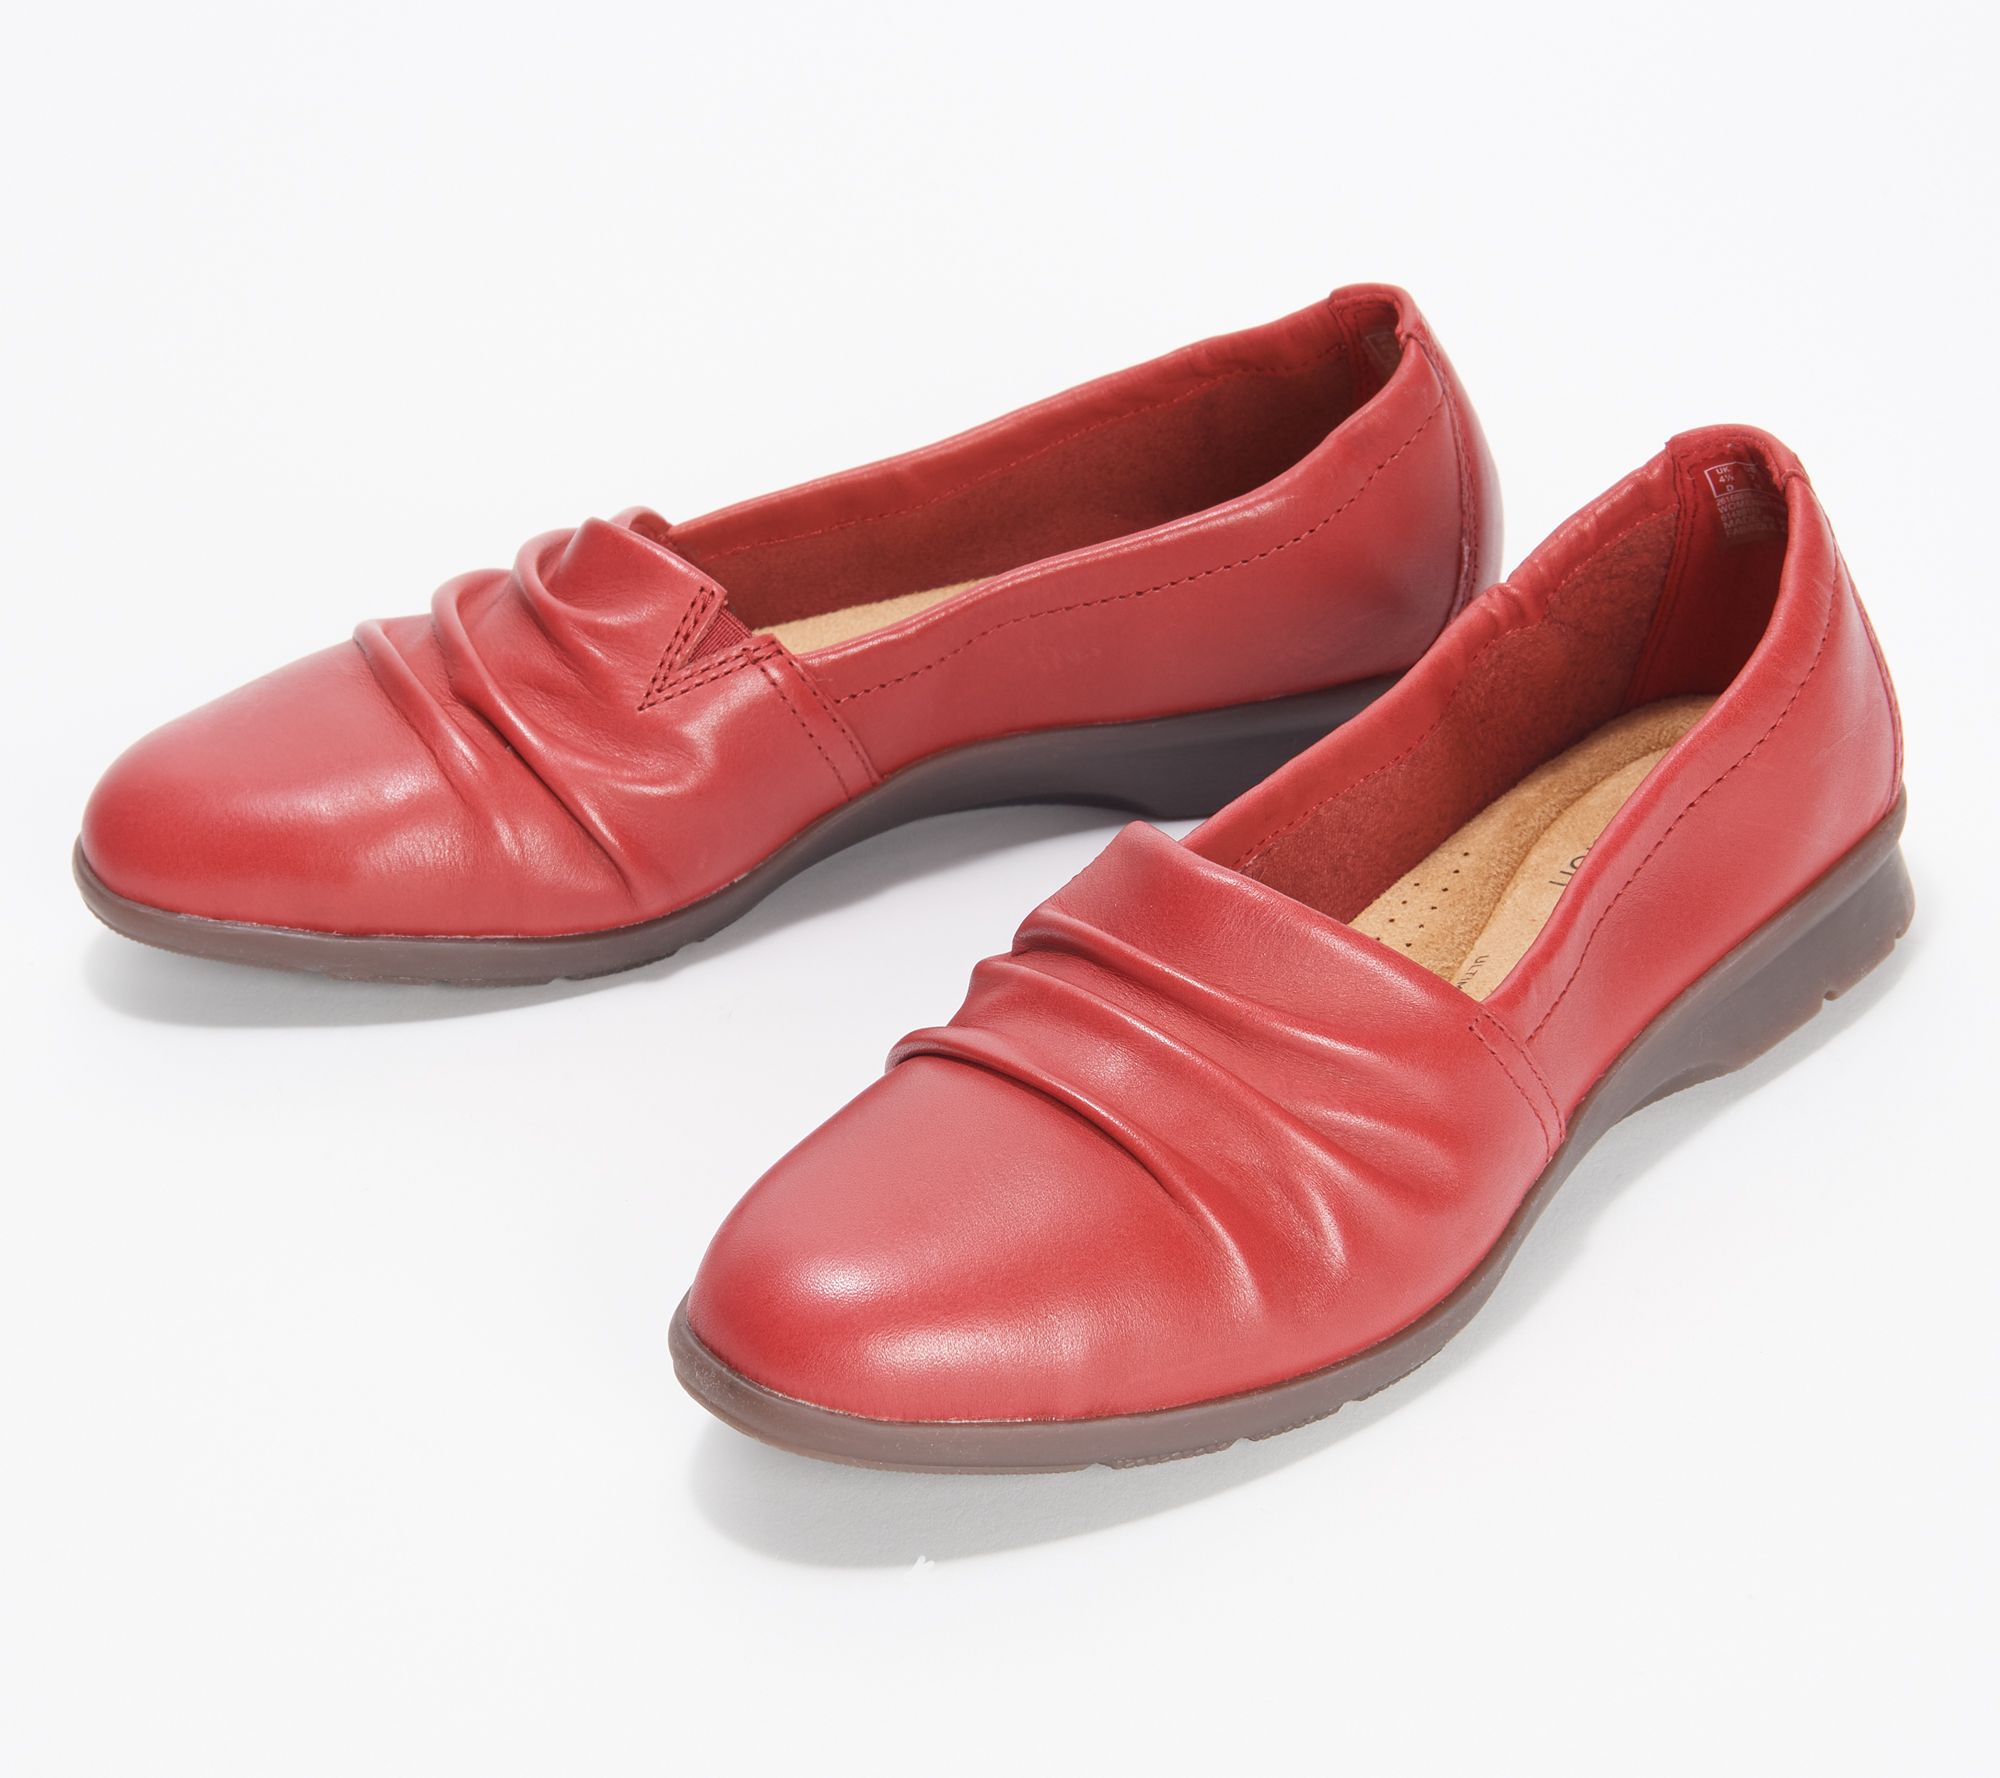 Clarks Collection Rouched Slip-Ons - Jenette Ruby - QVC.com